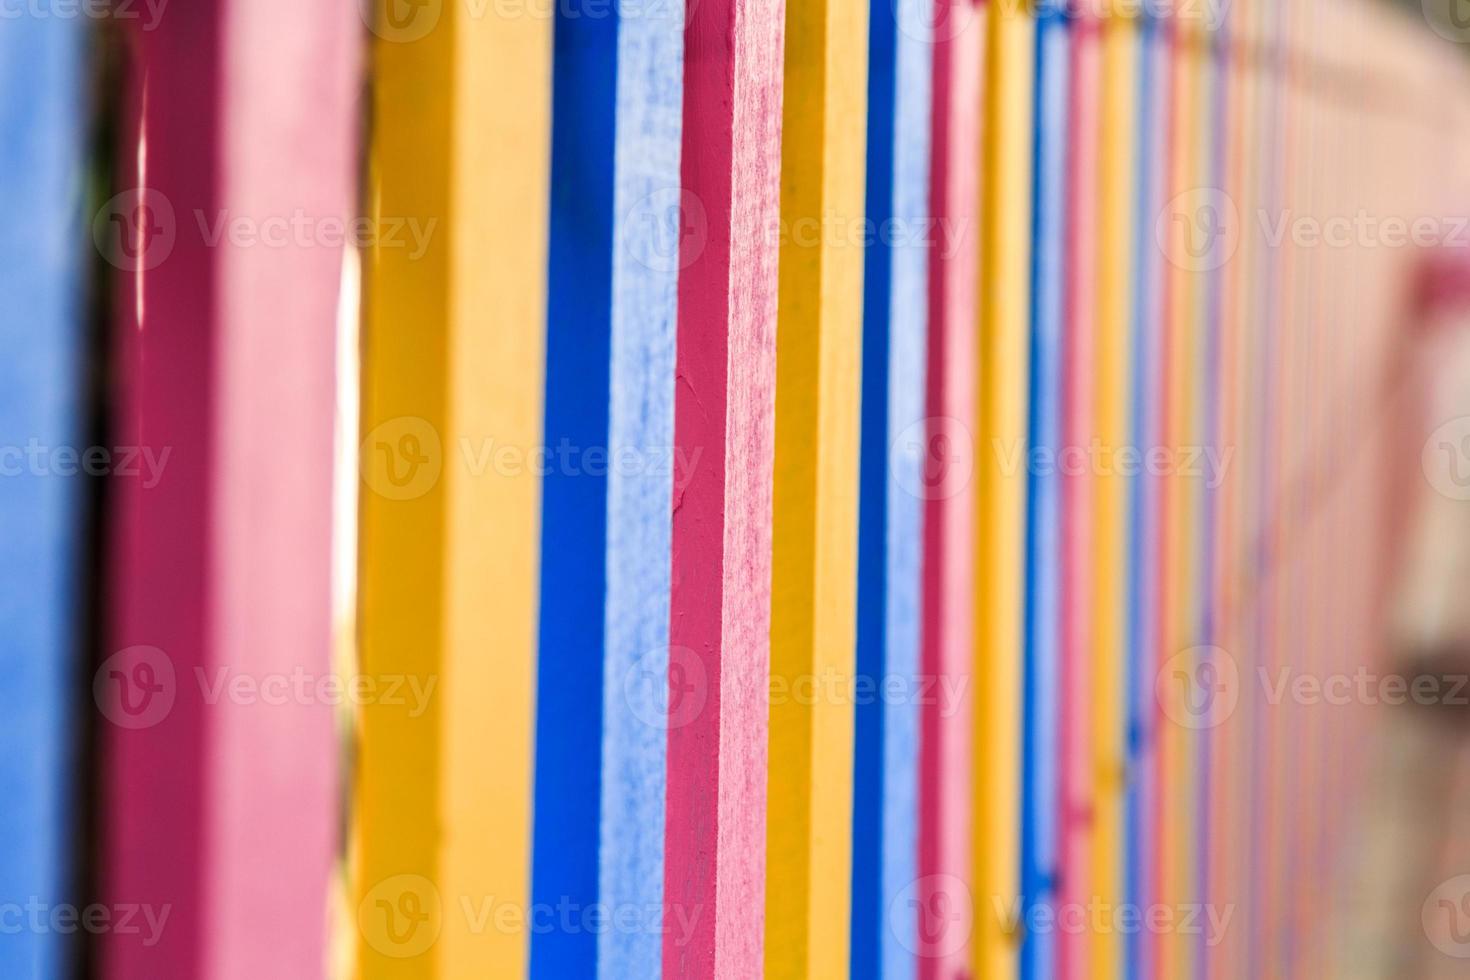 School fence made of plaswood with a steel structure in the background was created to be beautiful in a variety of colors in the imagination of children. It is a kind of work of art. photo